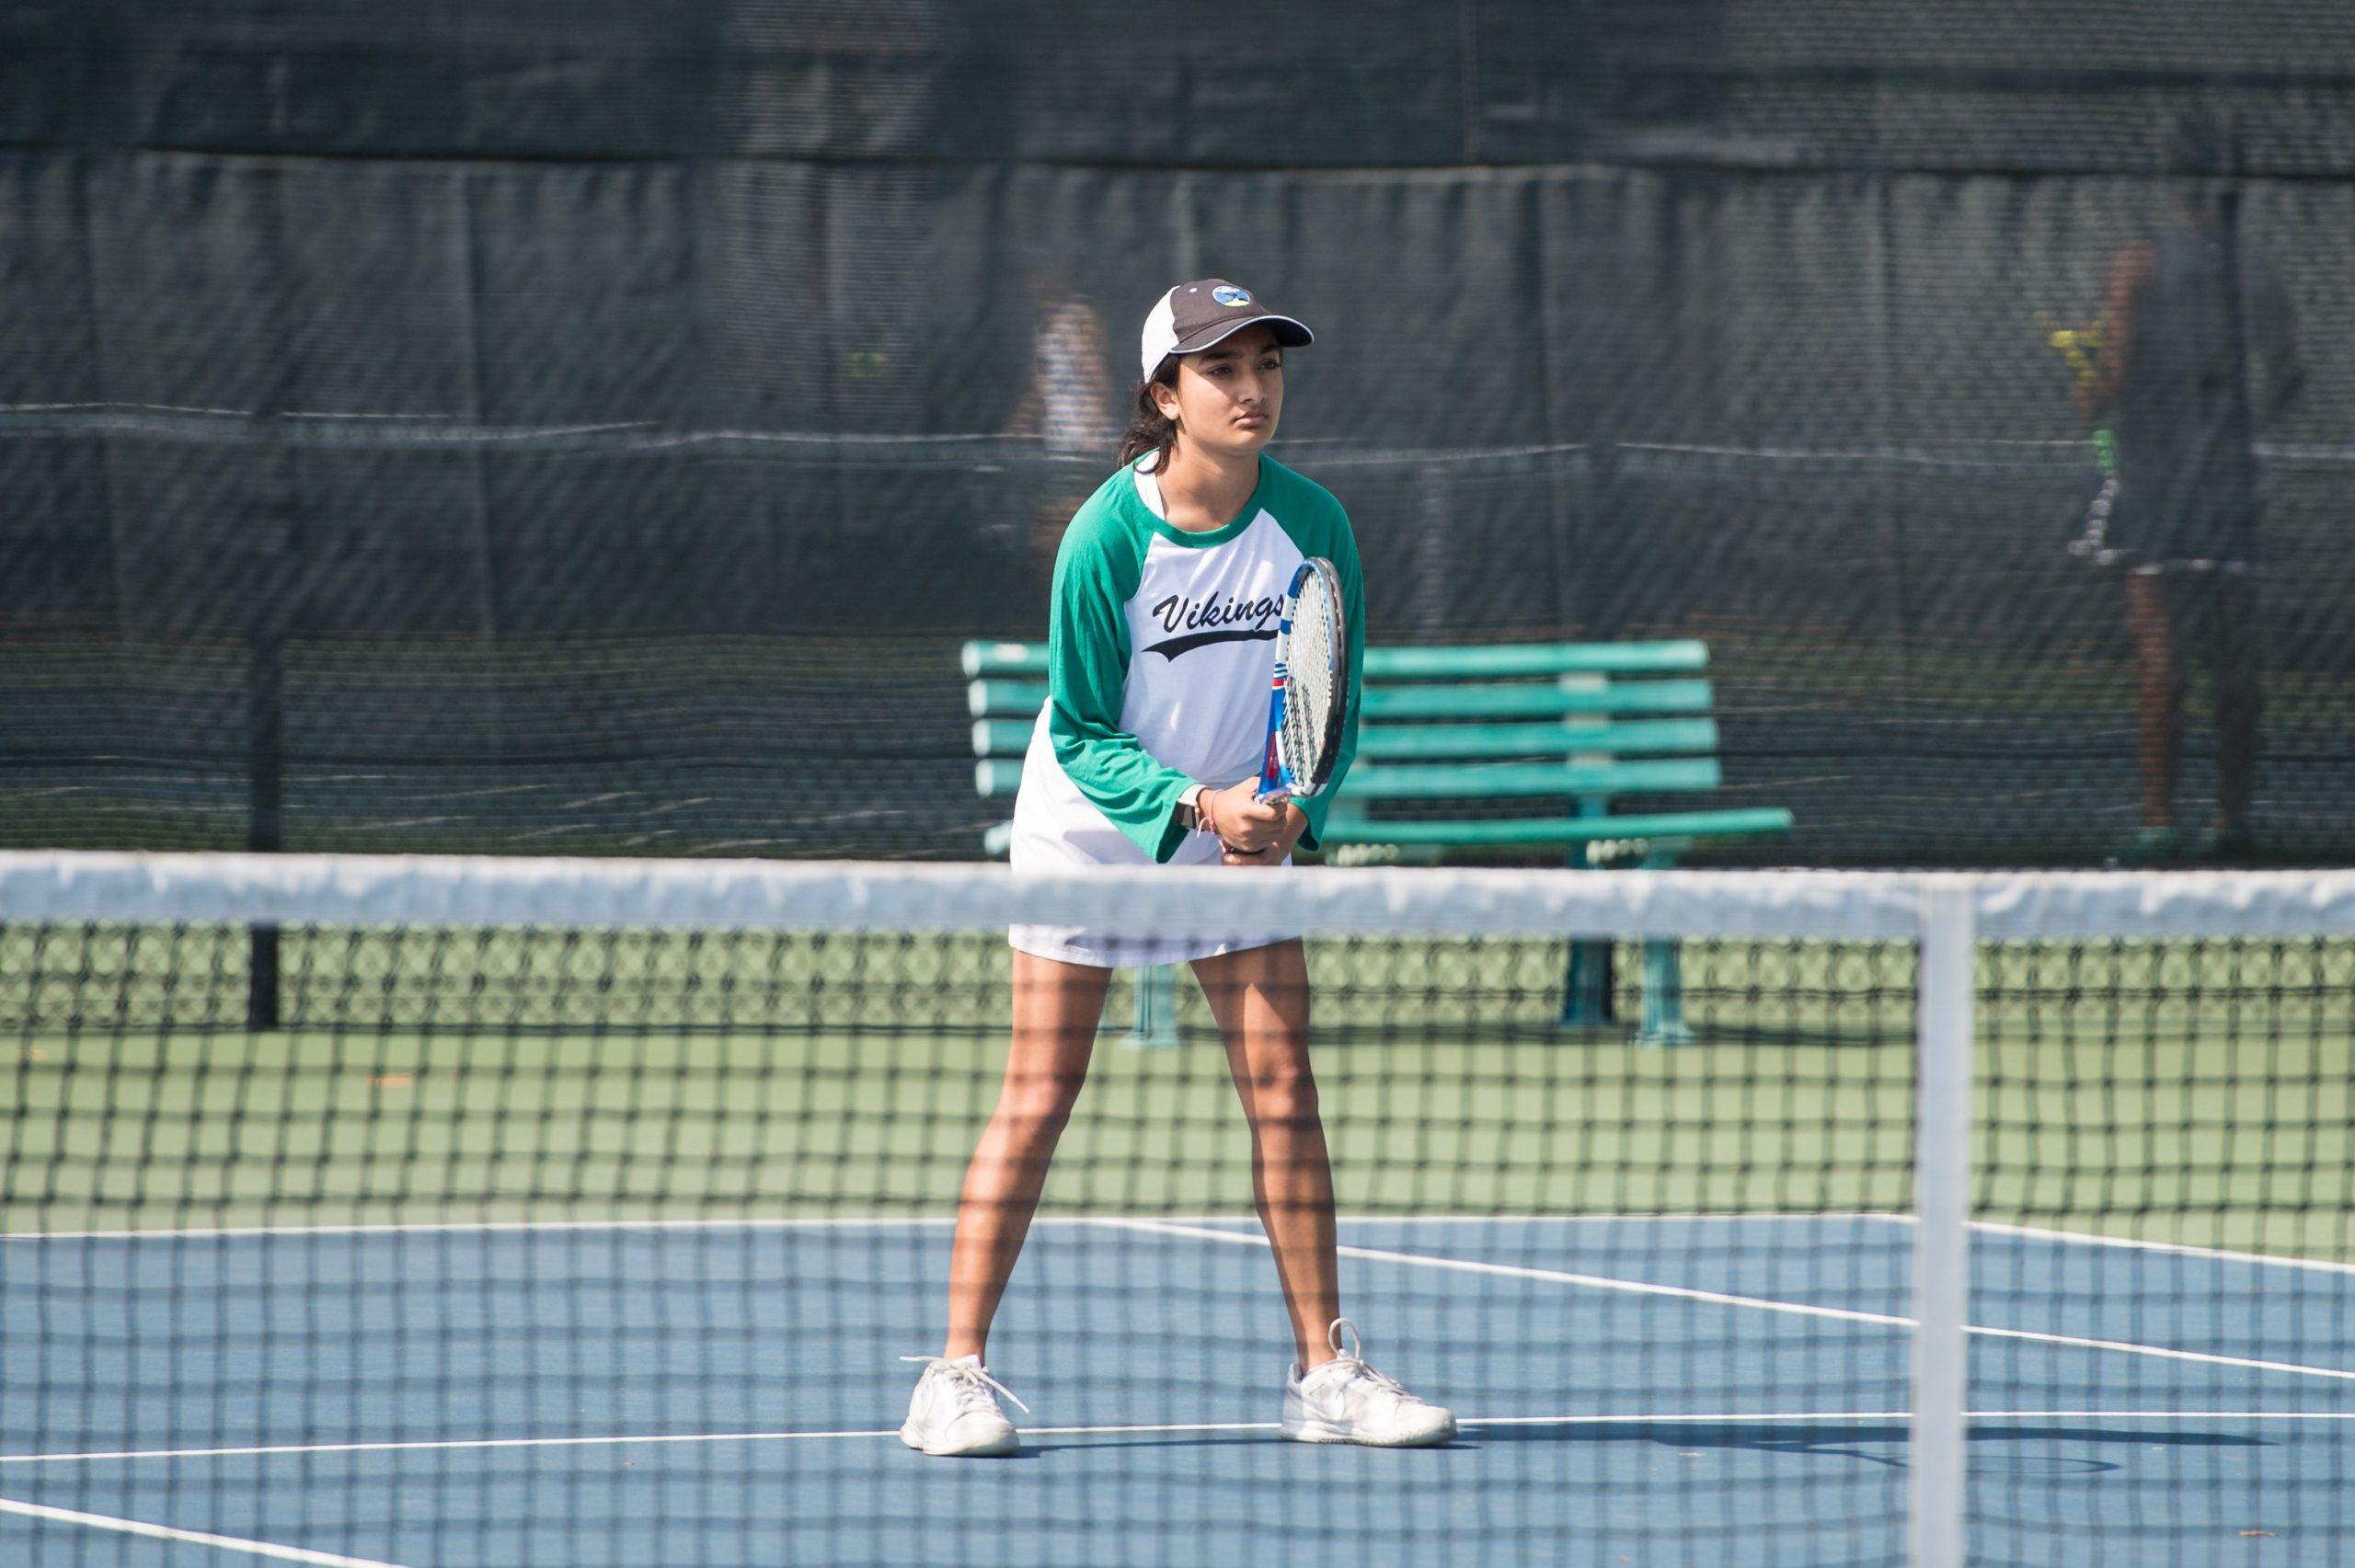 Girls tennis looks to end strong after a shaky season